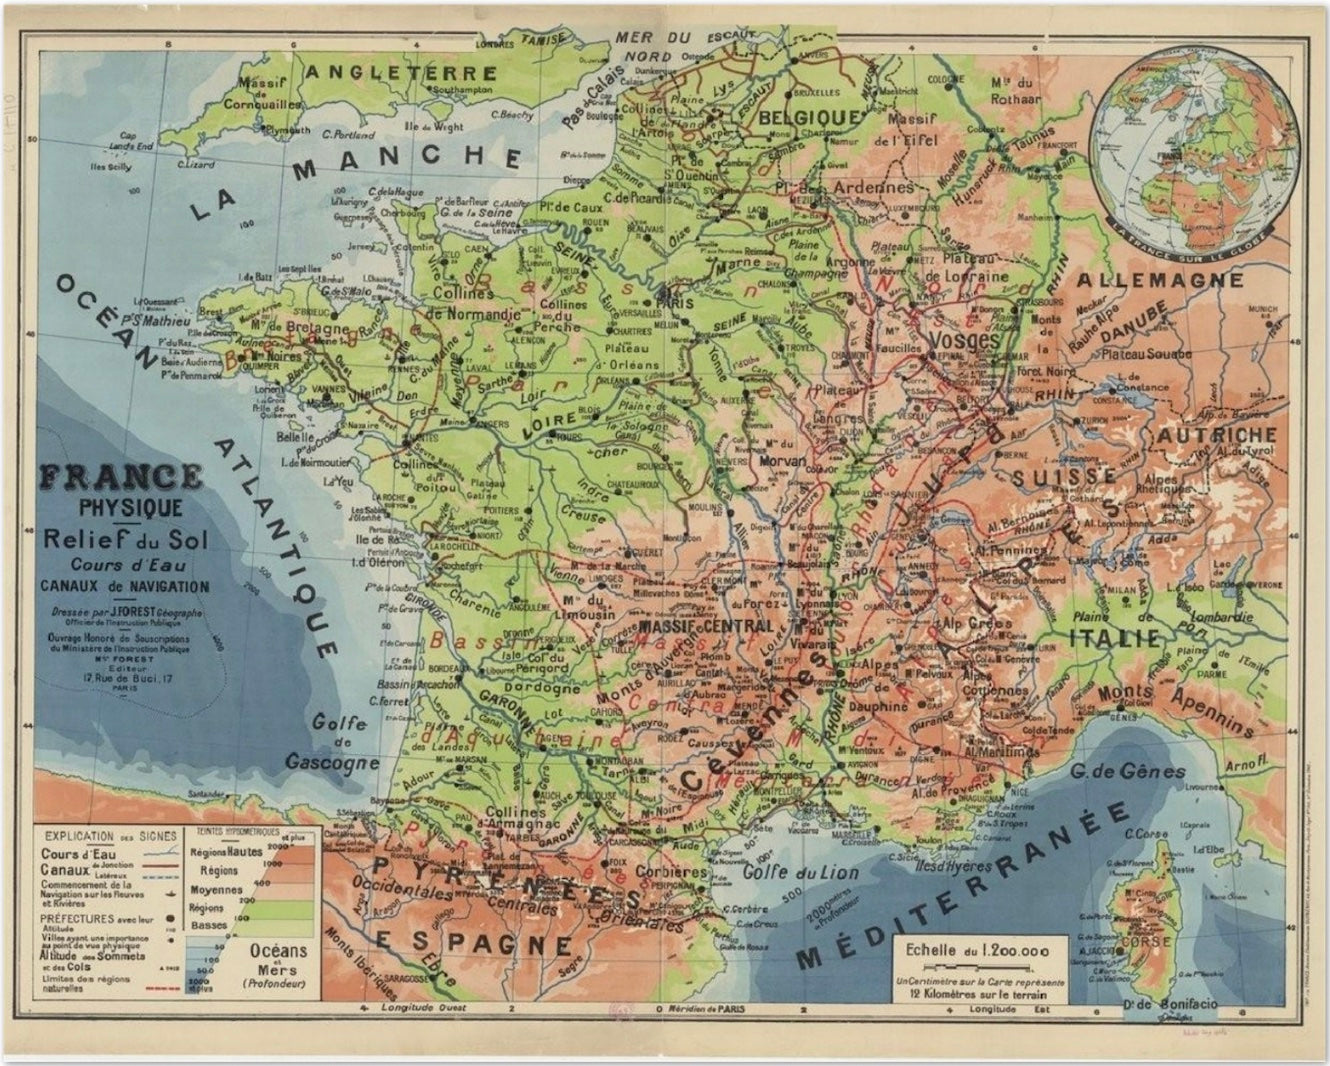 FRENCH SCHOOL MAP - FRANCE PHYSIQUE